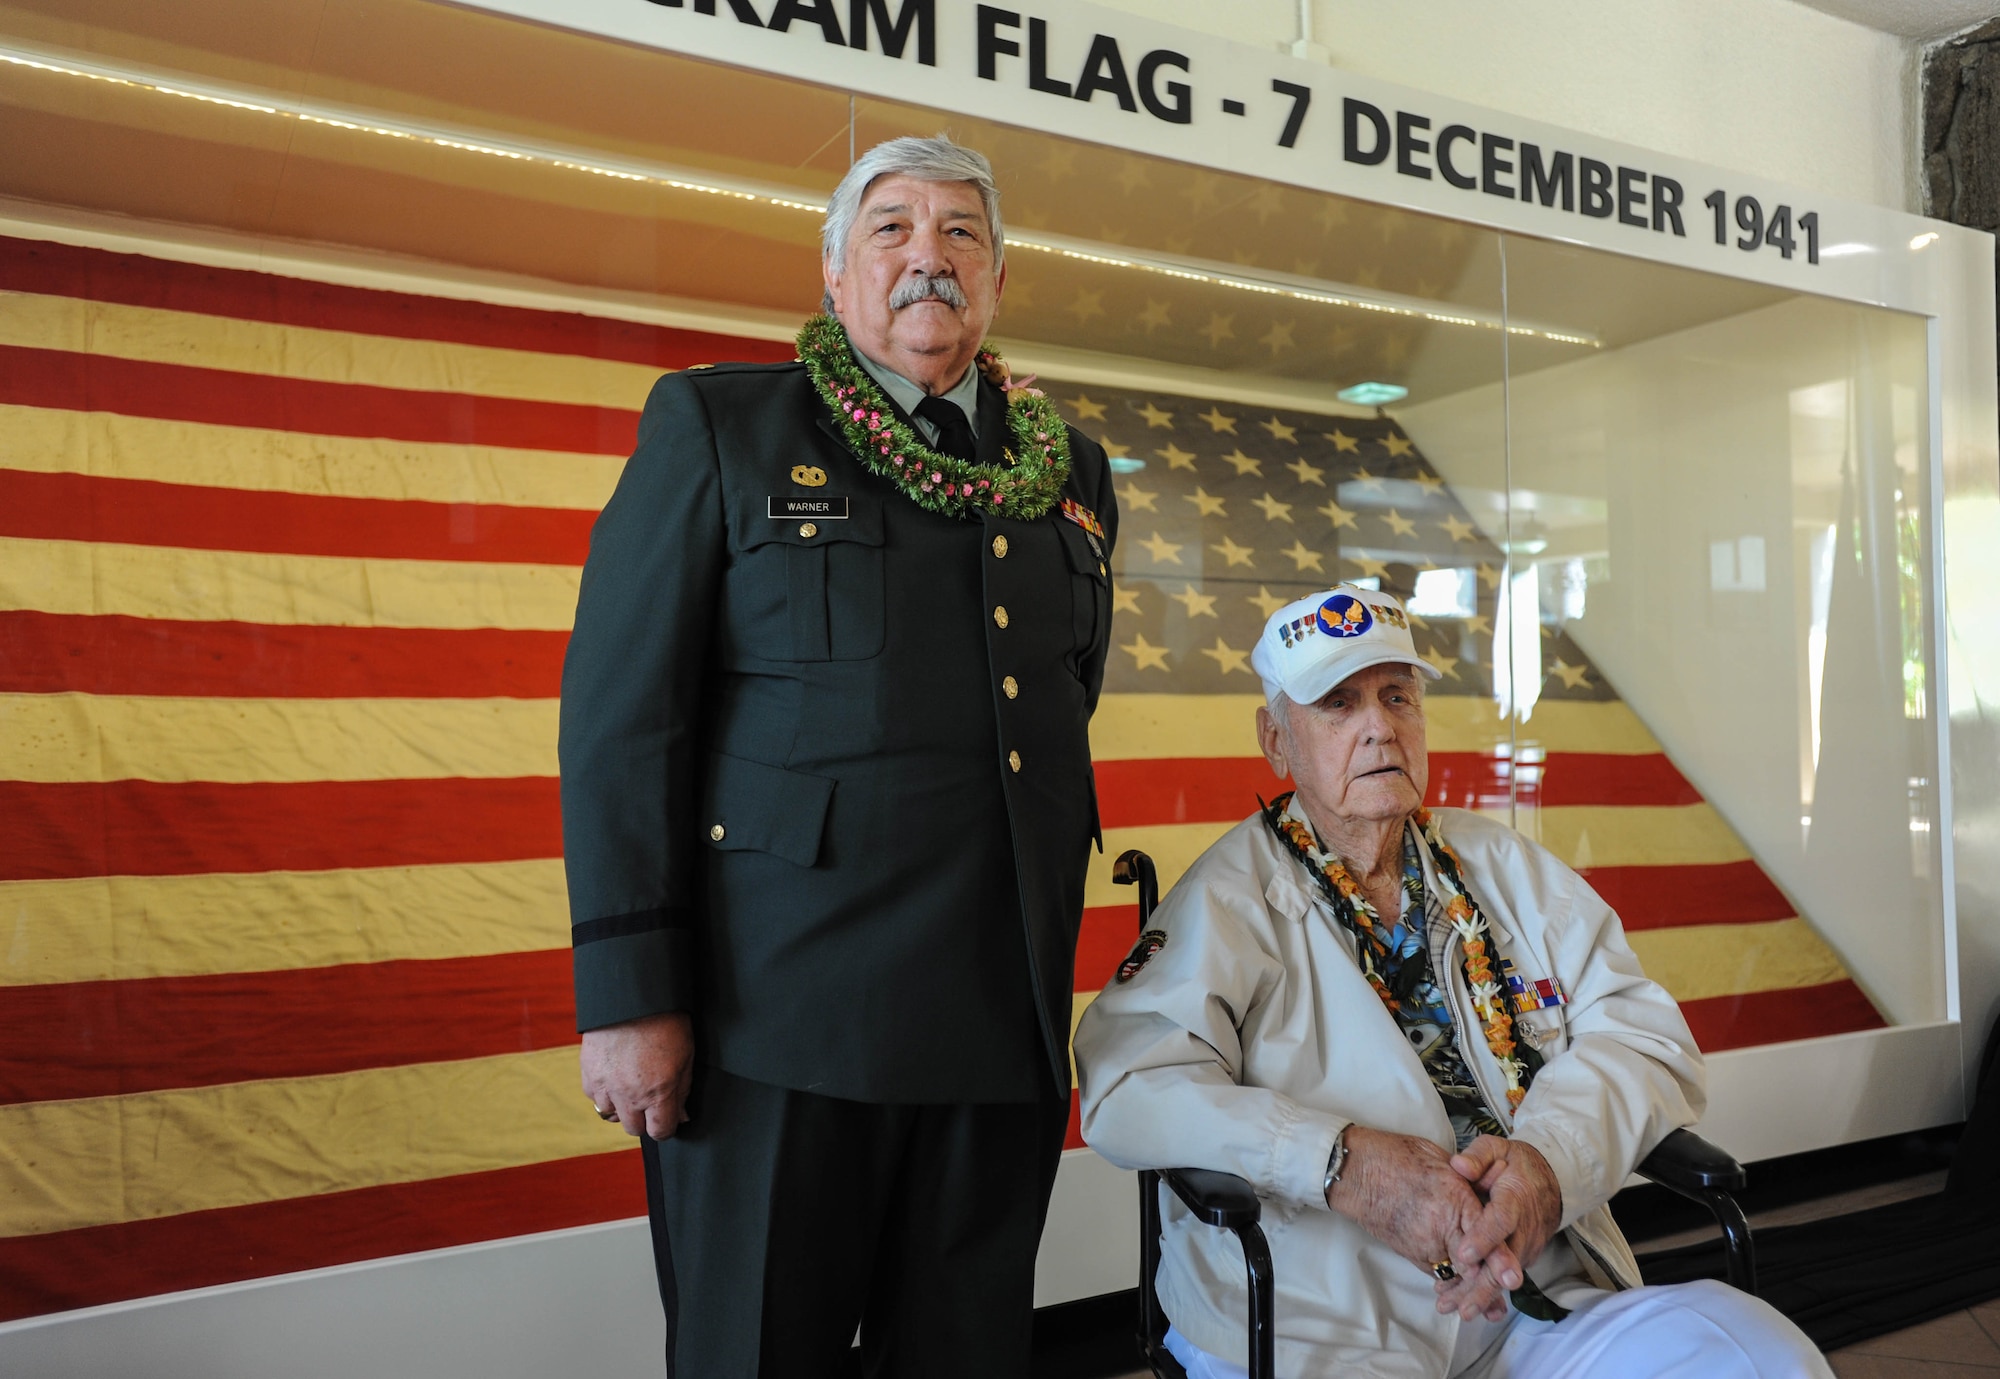 (Left to right) Retired U.S. Army Maj. Wynn Warner and former U.S. Army Air Forces Tech. Sgt. Durward Swanson, Hickam Field attack survior, take a photo with "Old Glory" after a ceremony, Dec. 7, 2015, Joint Base Pearl Harbor-Hickam, Hawaii. Warner’s father, U.S. Army Air Forces Sgt. Tracy Warner, raised the flag Dec. 7, 1941, and Swanson lowered it the night after the attacks. (U.S. Air Force photo by Tech. Sgt. Amanda Dick/Released)